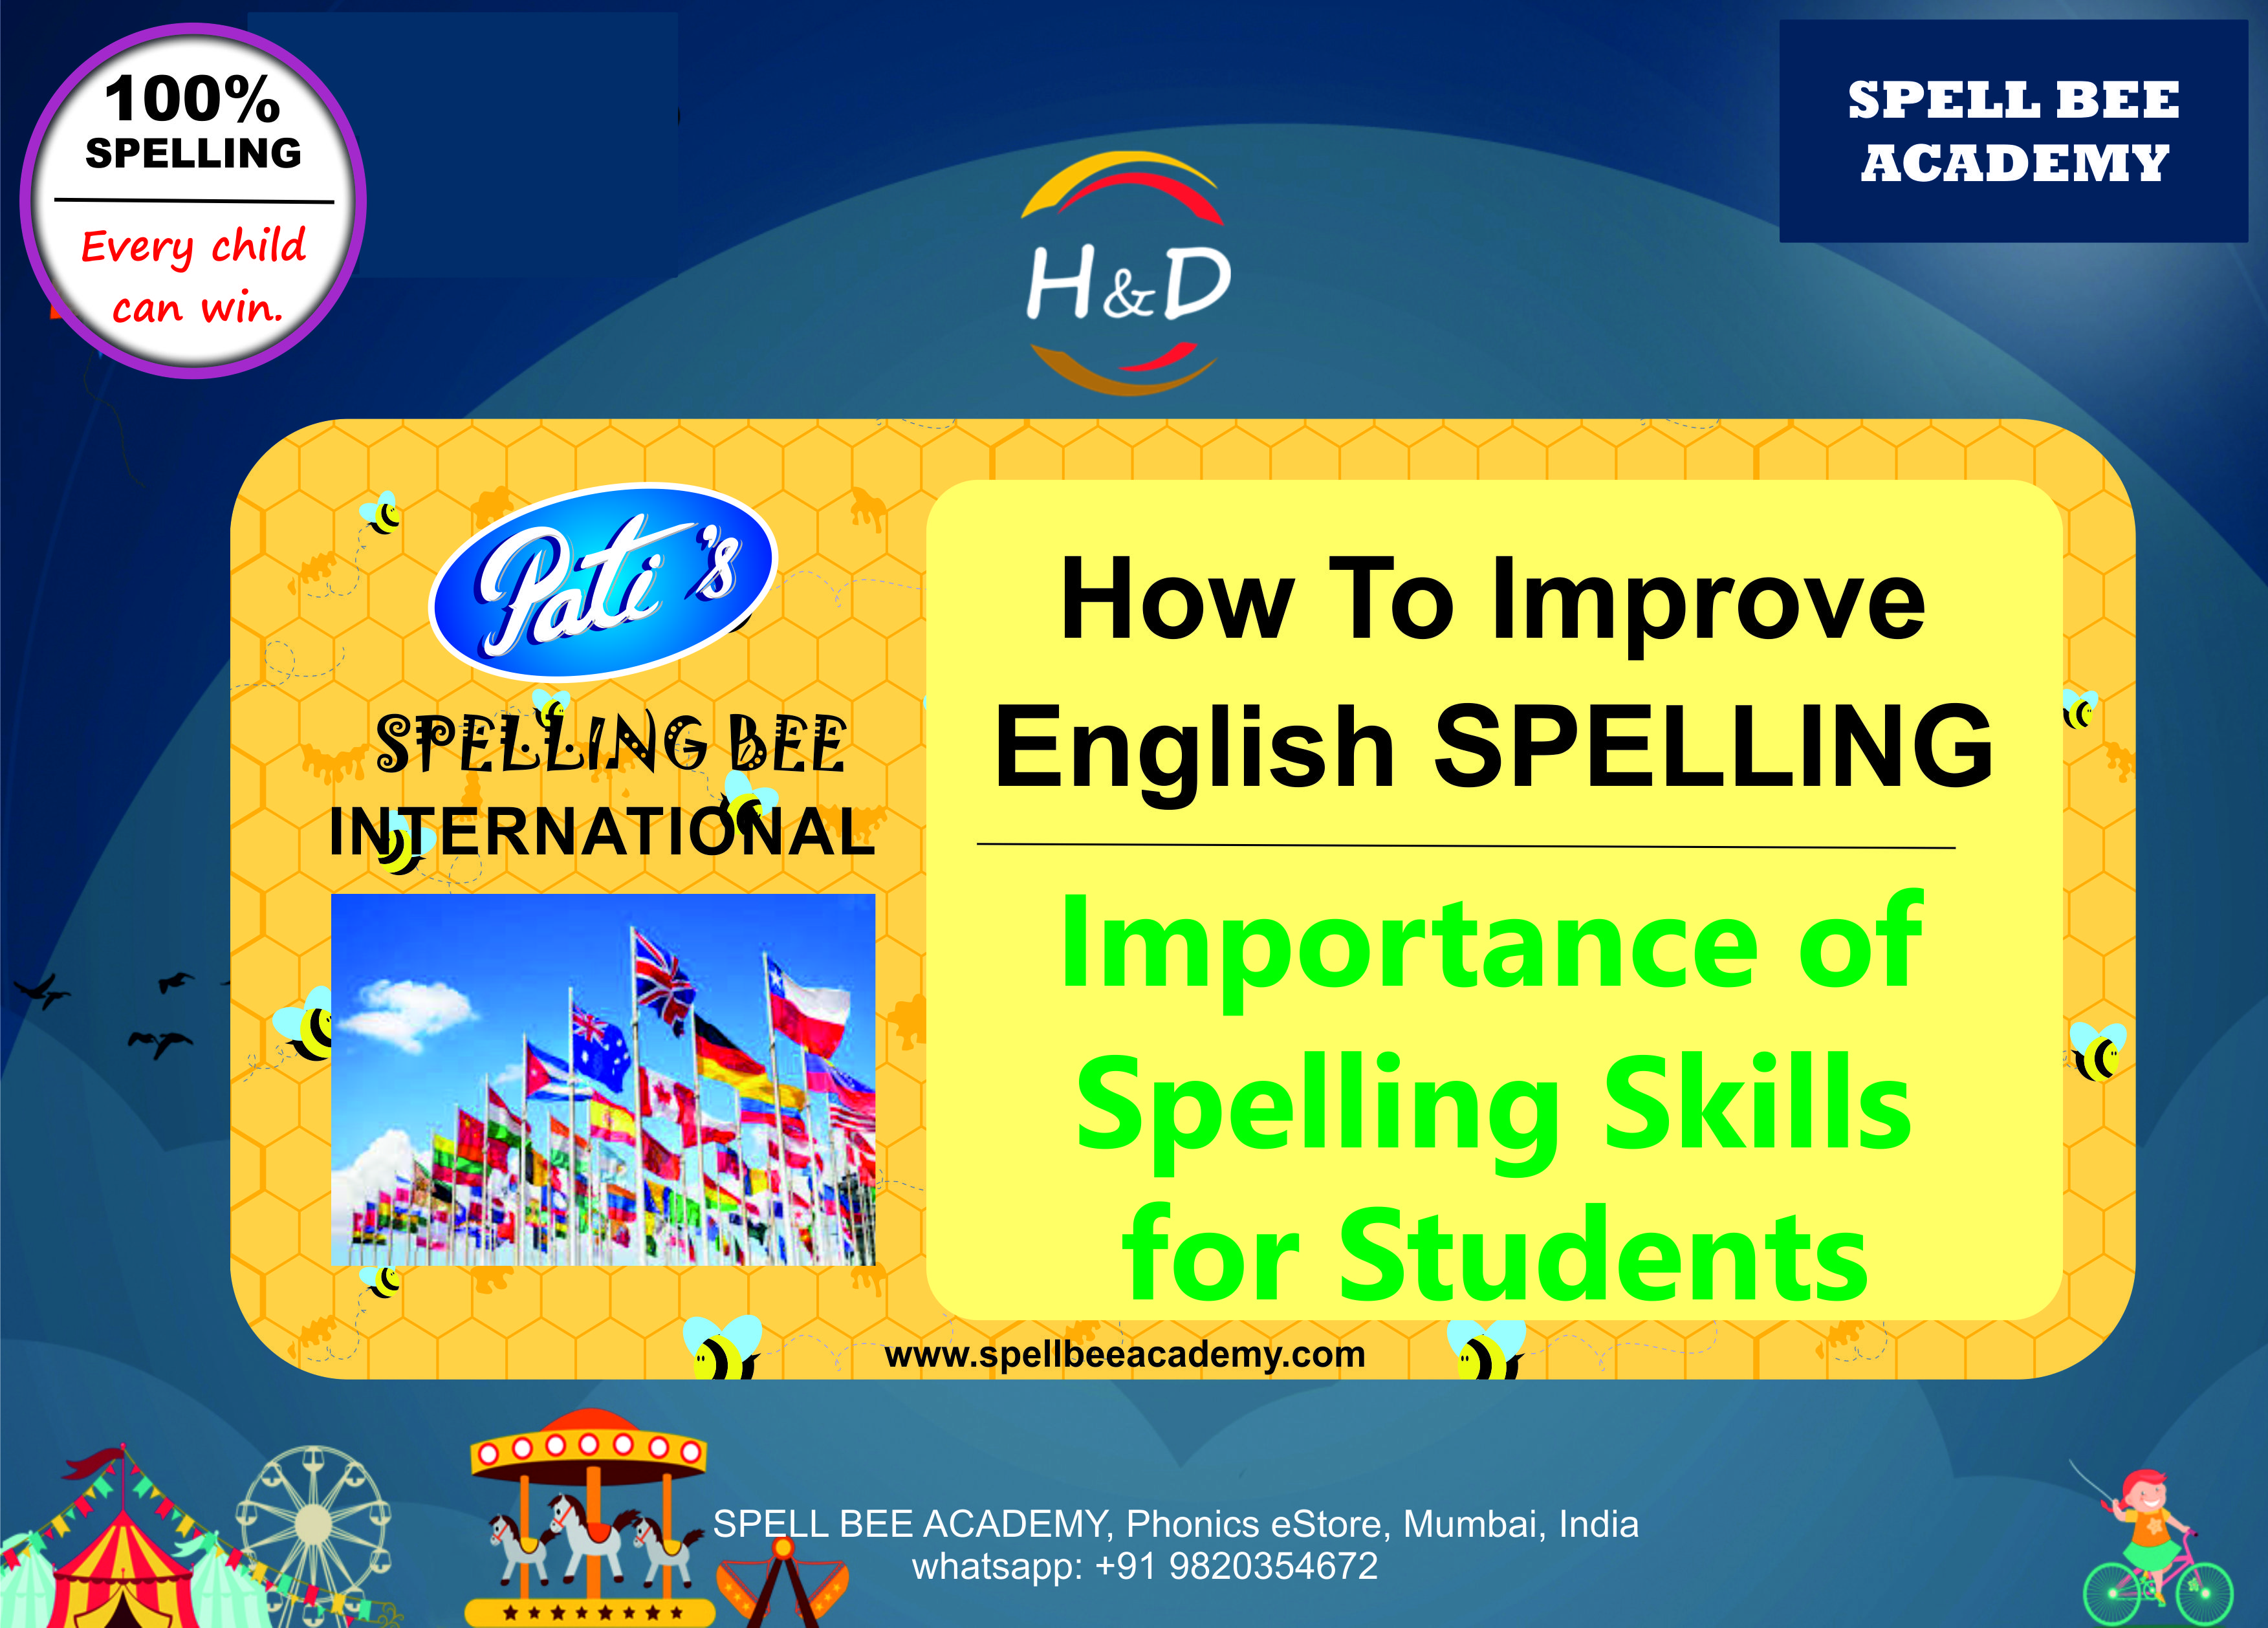 Importance of Spelling Skills for Students